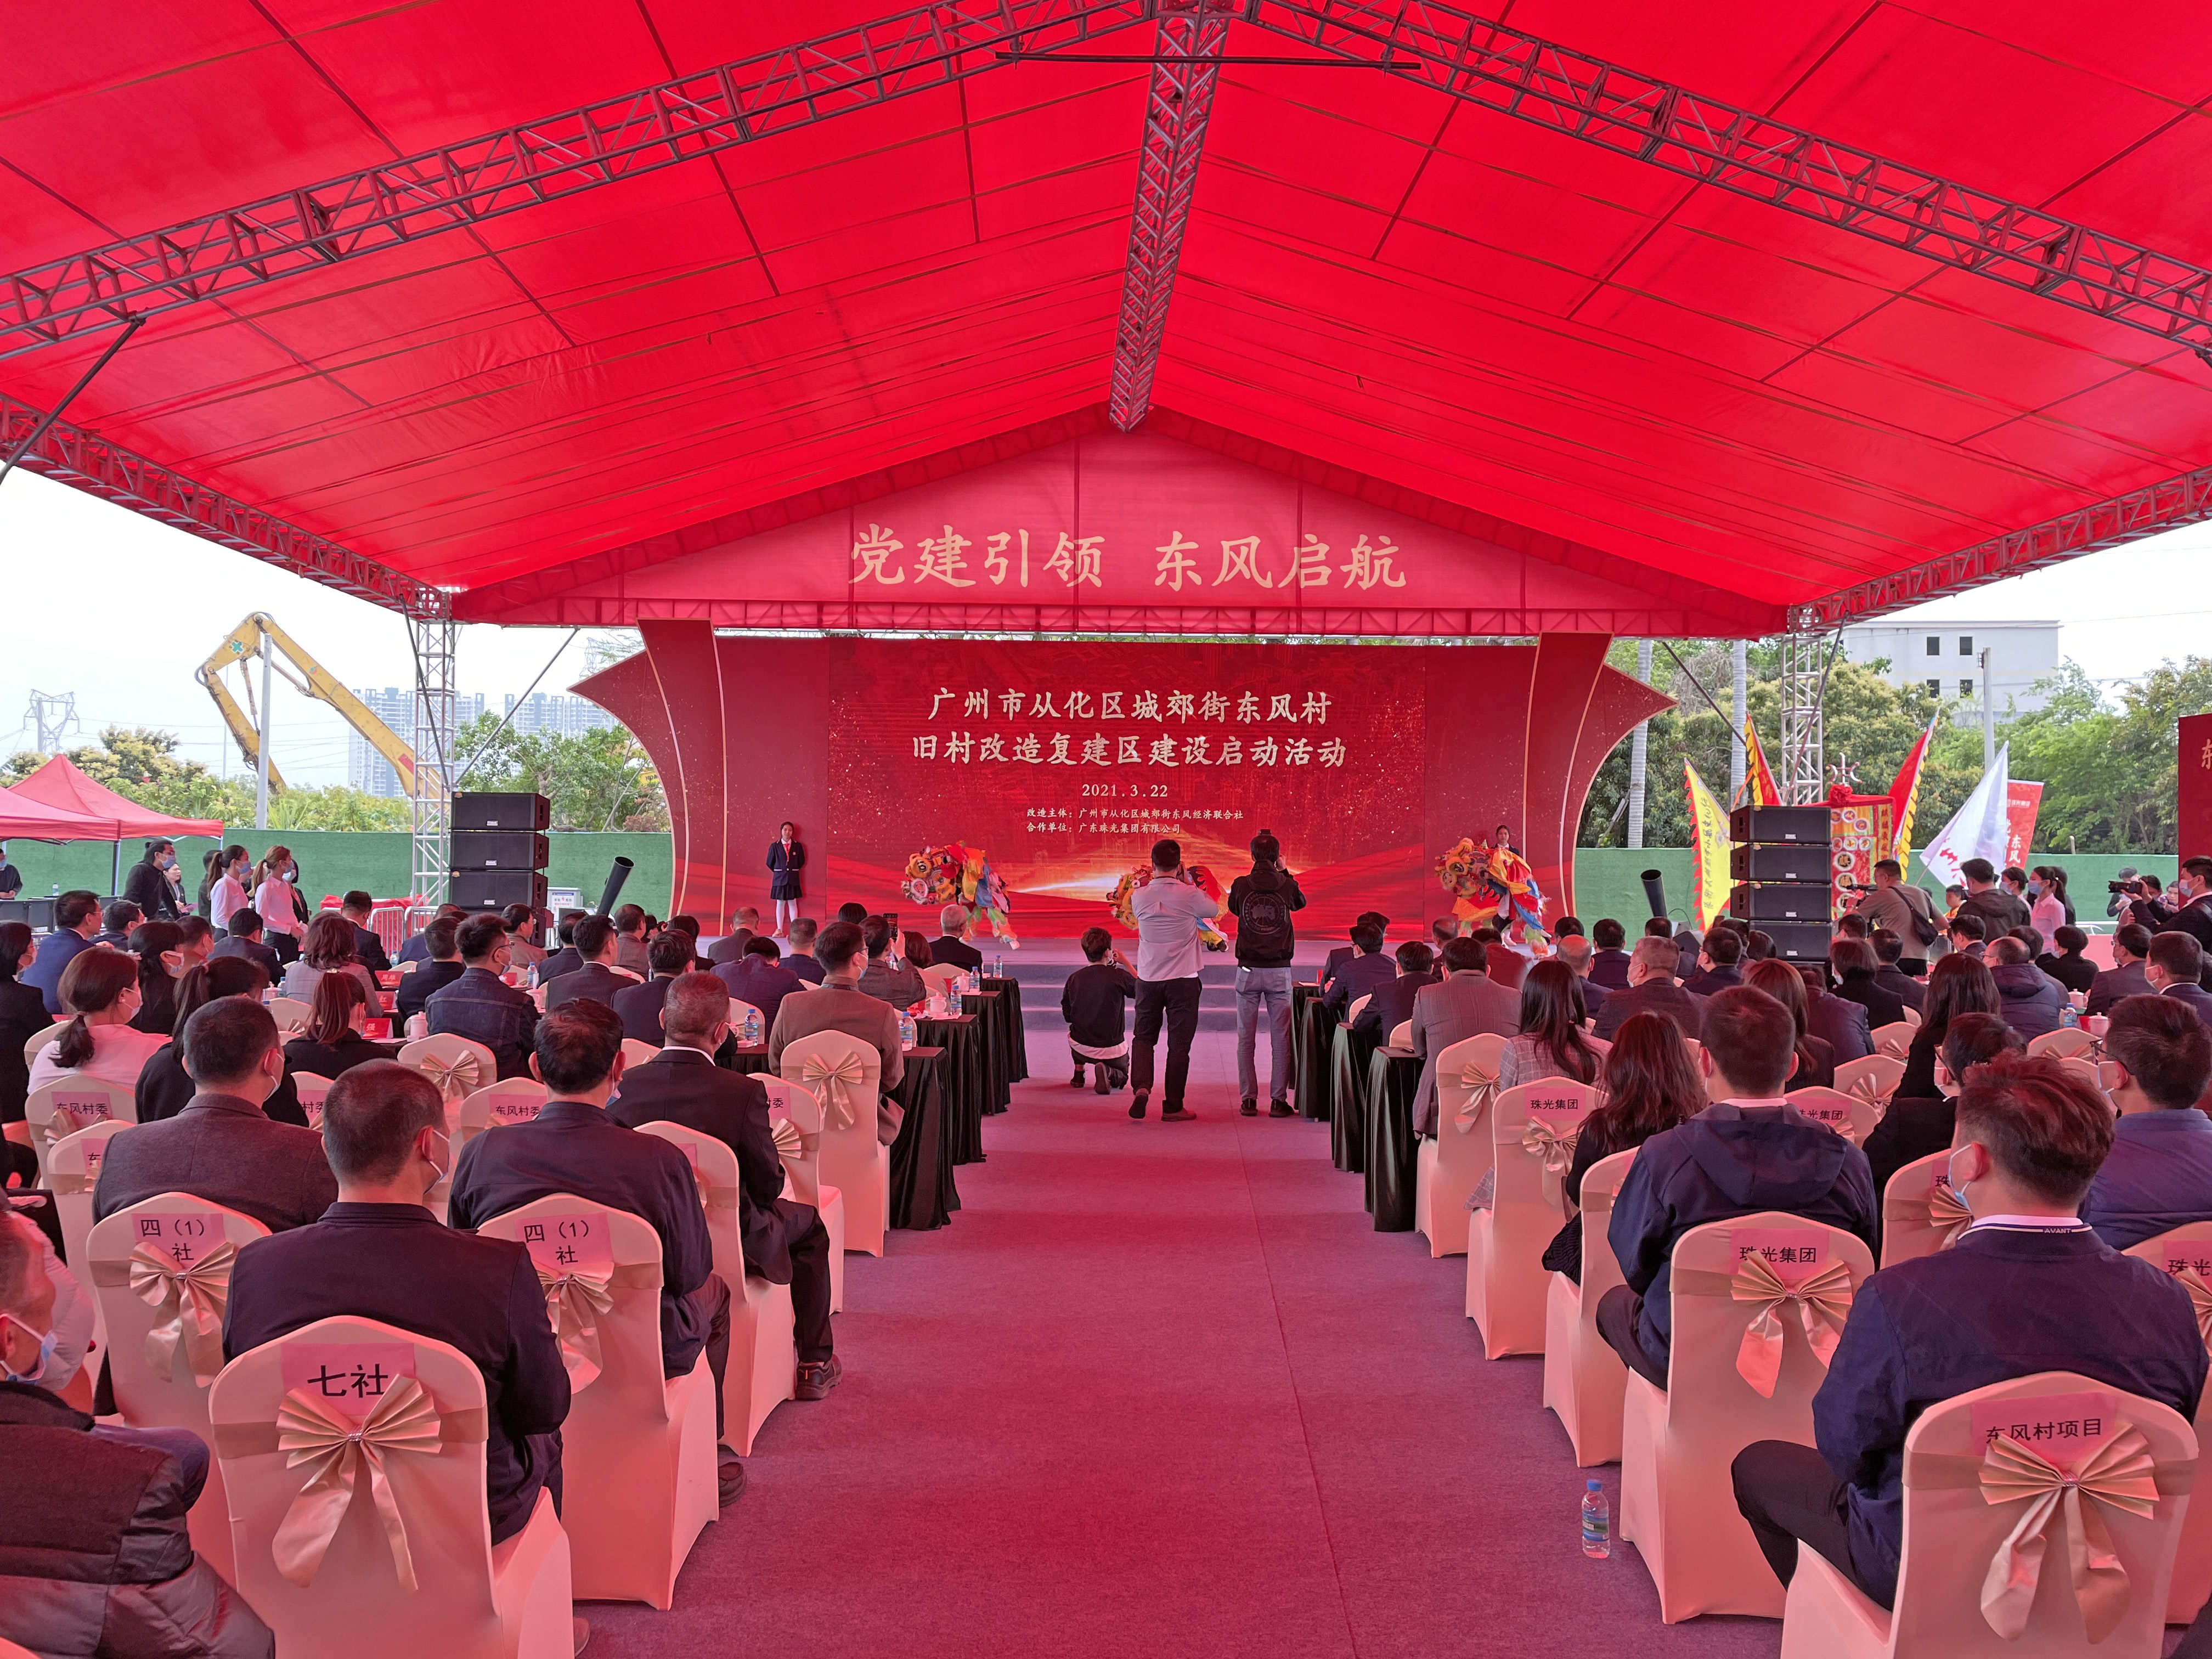 Dongfeng village to be rebuilt into business district with Guangdong style